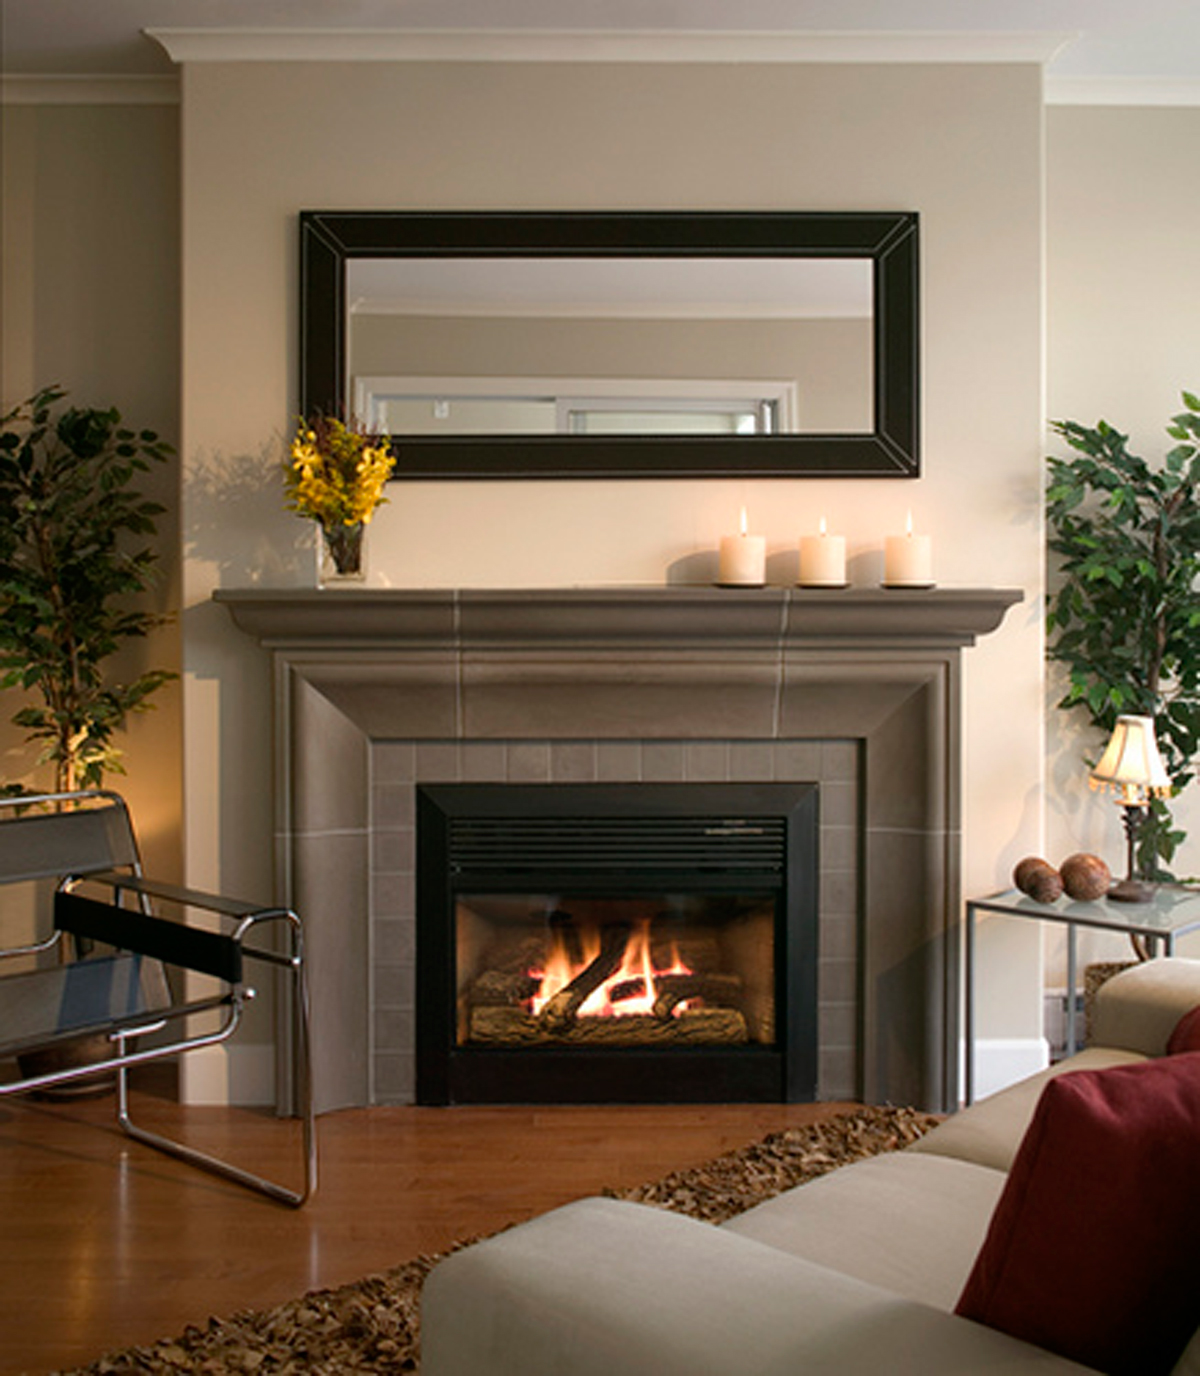 How to Enjoy a Wood-Burning Fireplace This Winter